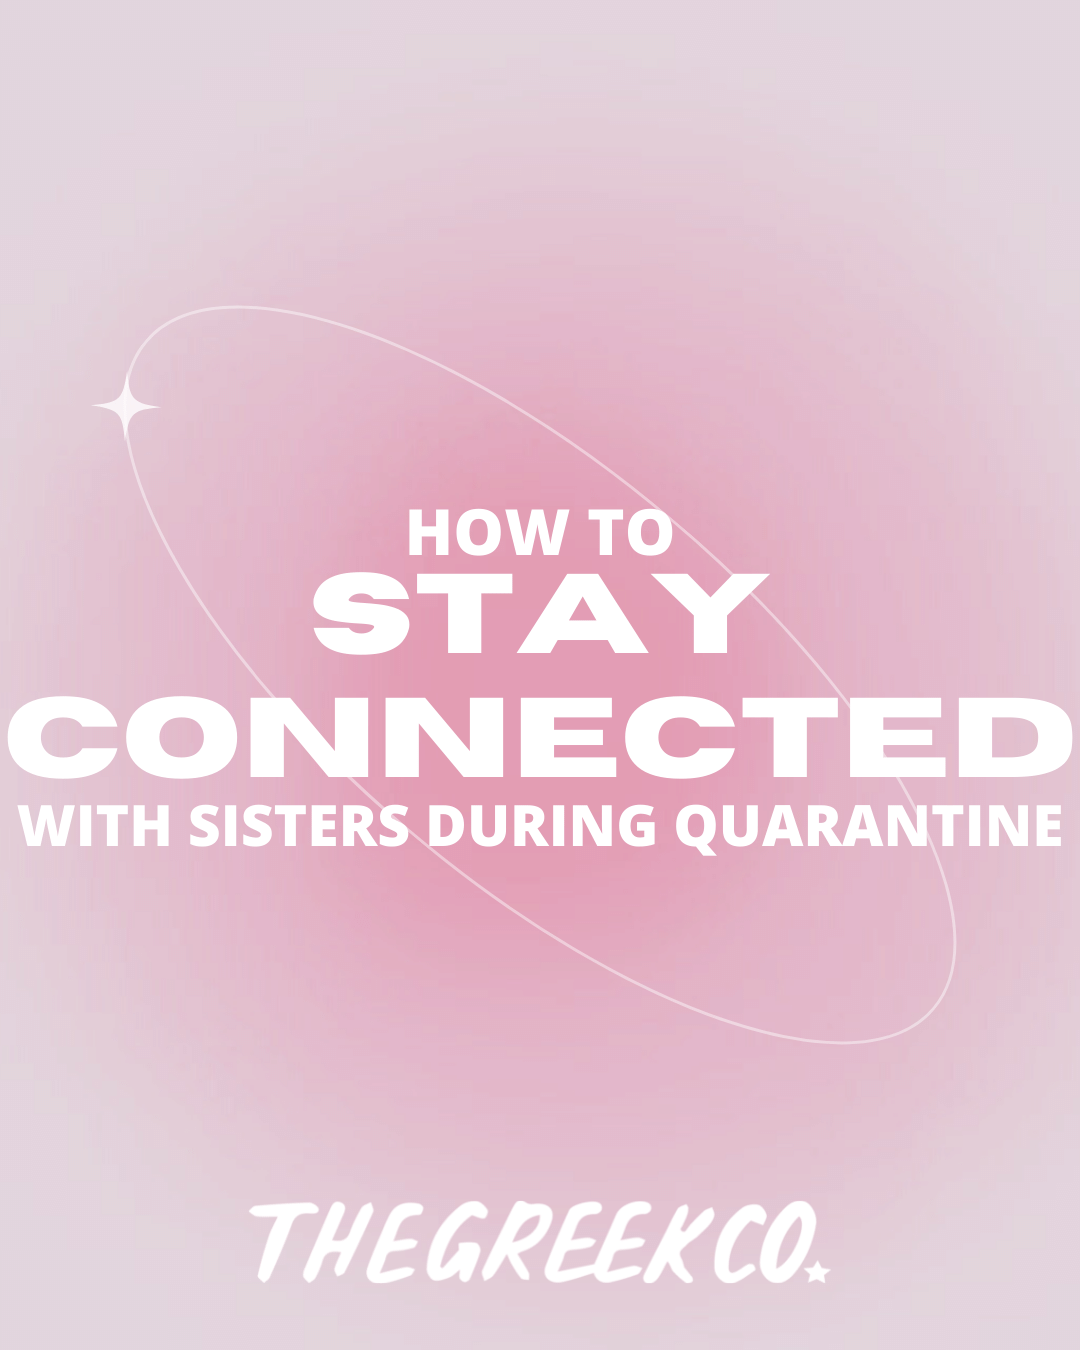 How to Stay Connected with Sisters During Quarantine - The Greek Co. Blog Post